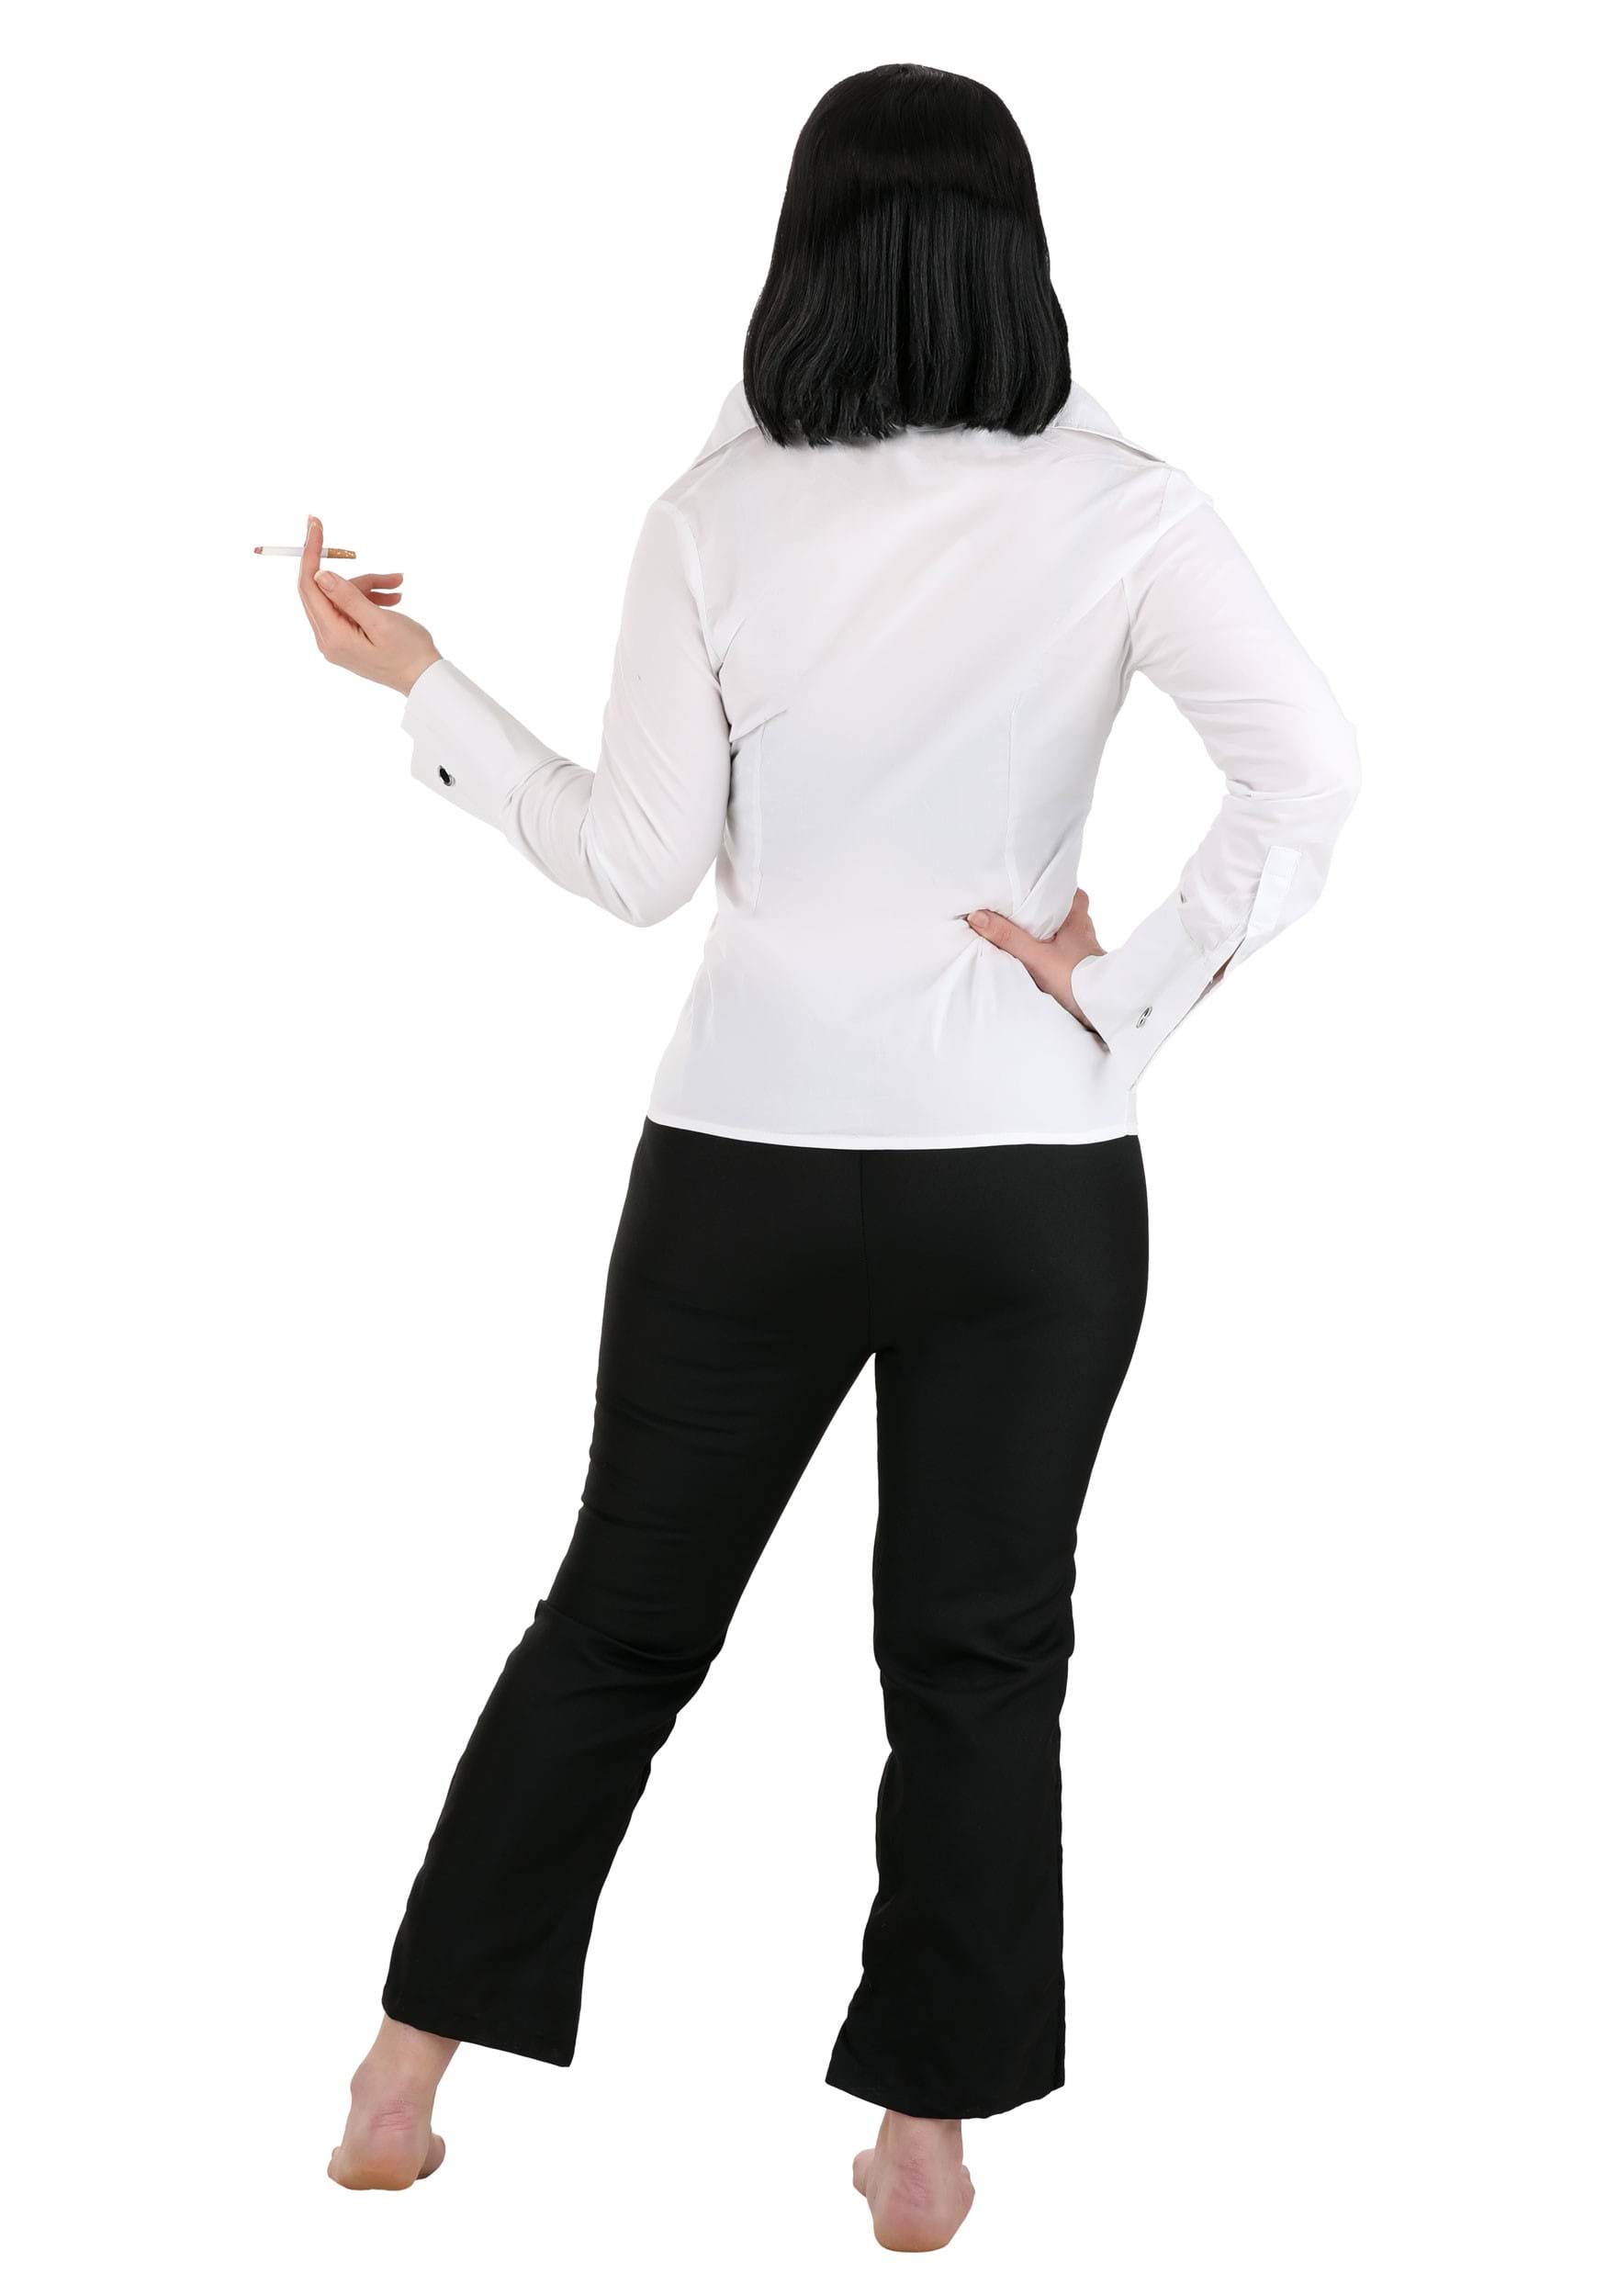 Mia Wallace Pulp Fiction Adult Costume